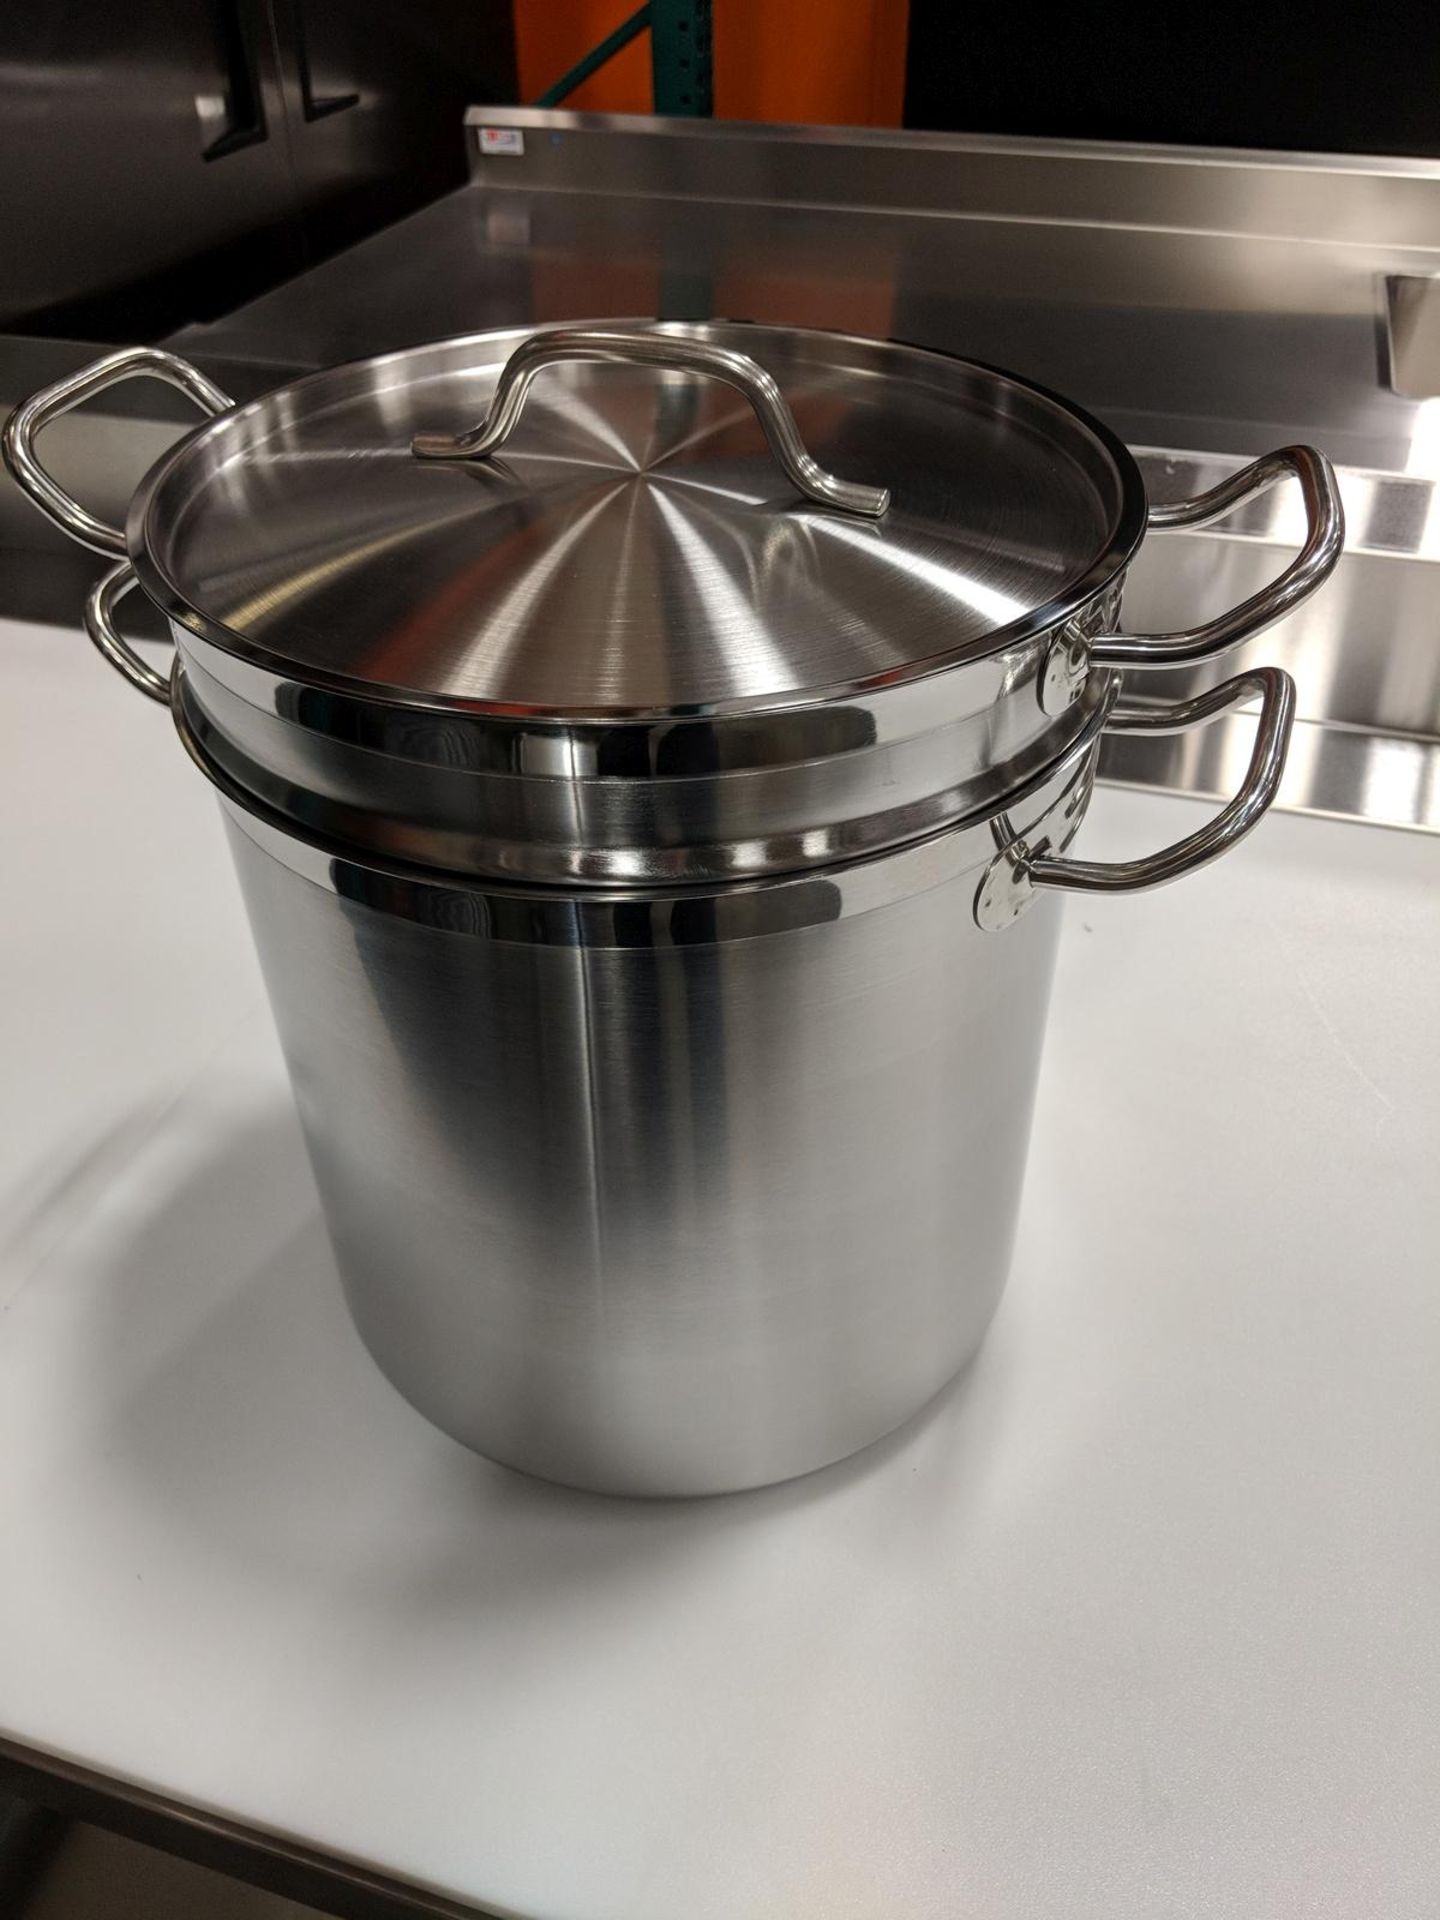 20qt Heavy Duty Stainless Stock Pot with Steamer Basket - Image 7 of 7